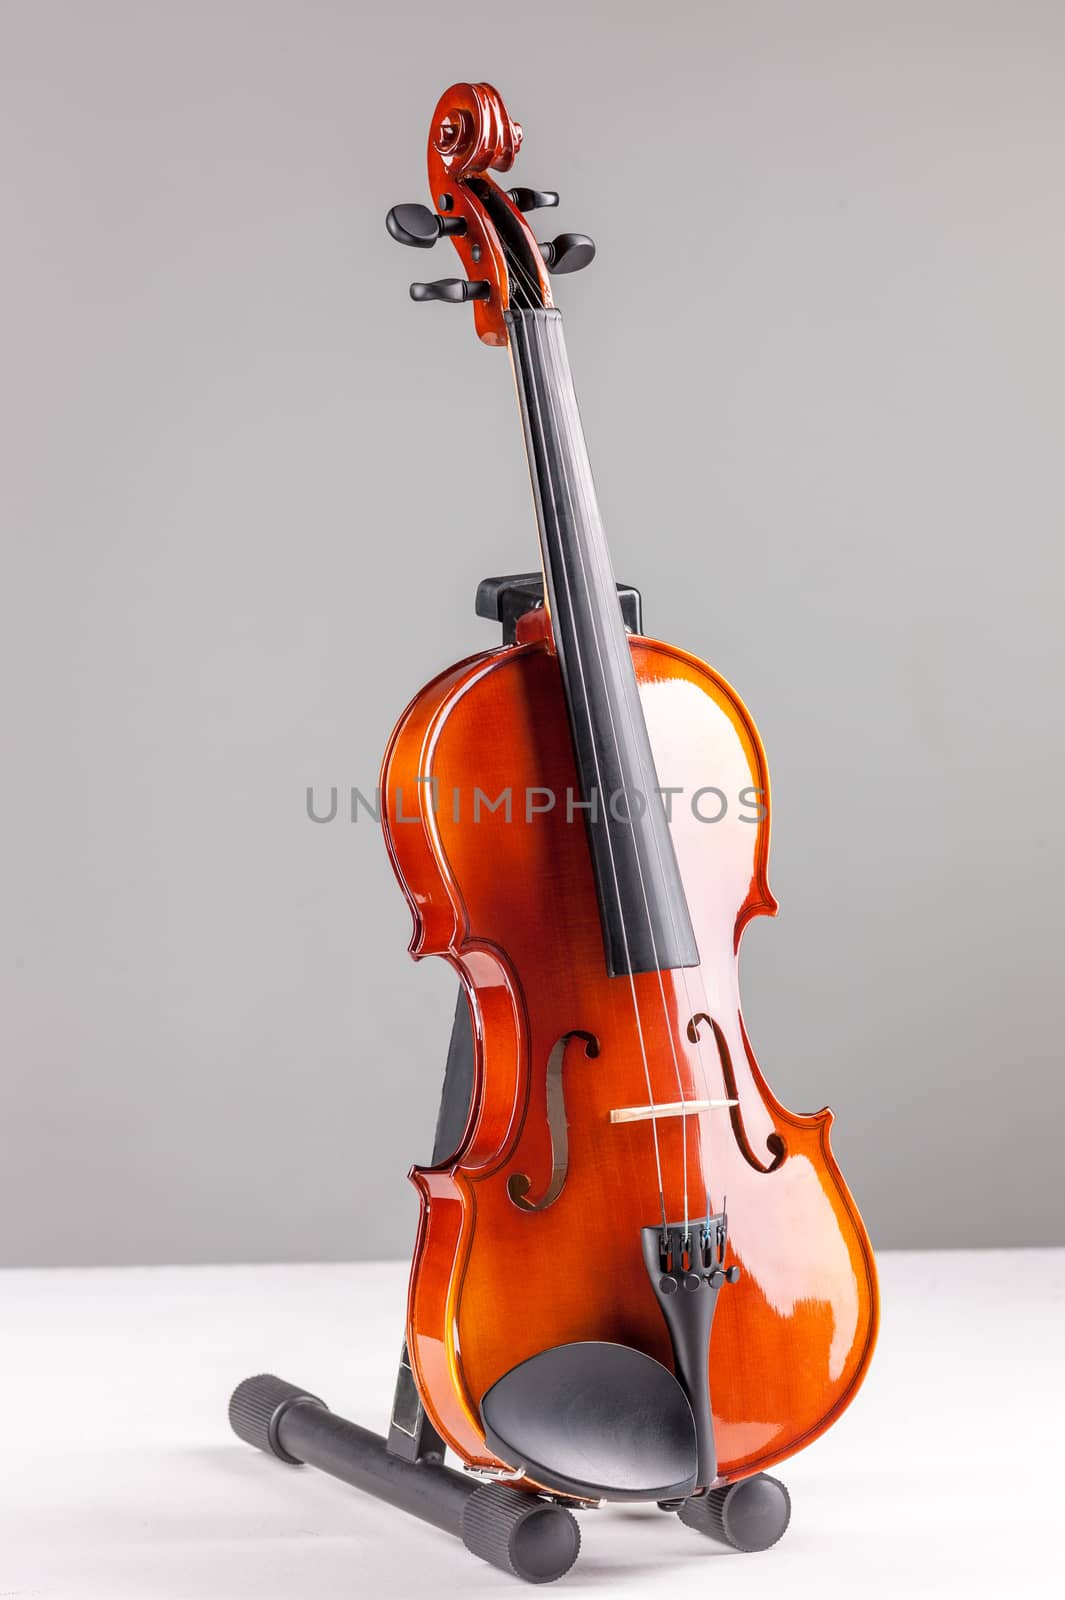 Violin front viewon a stand isolated on gray